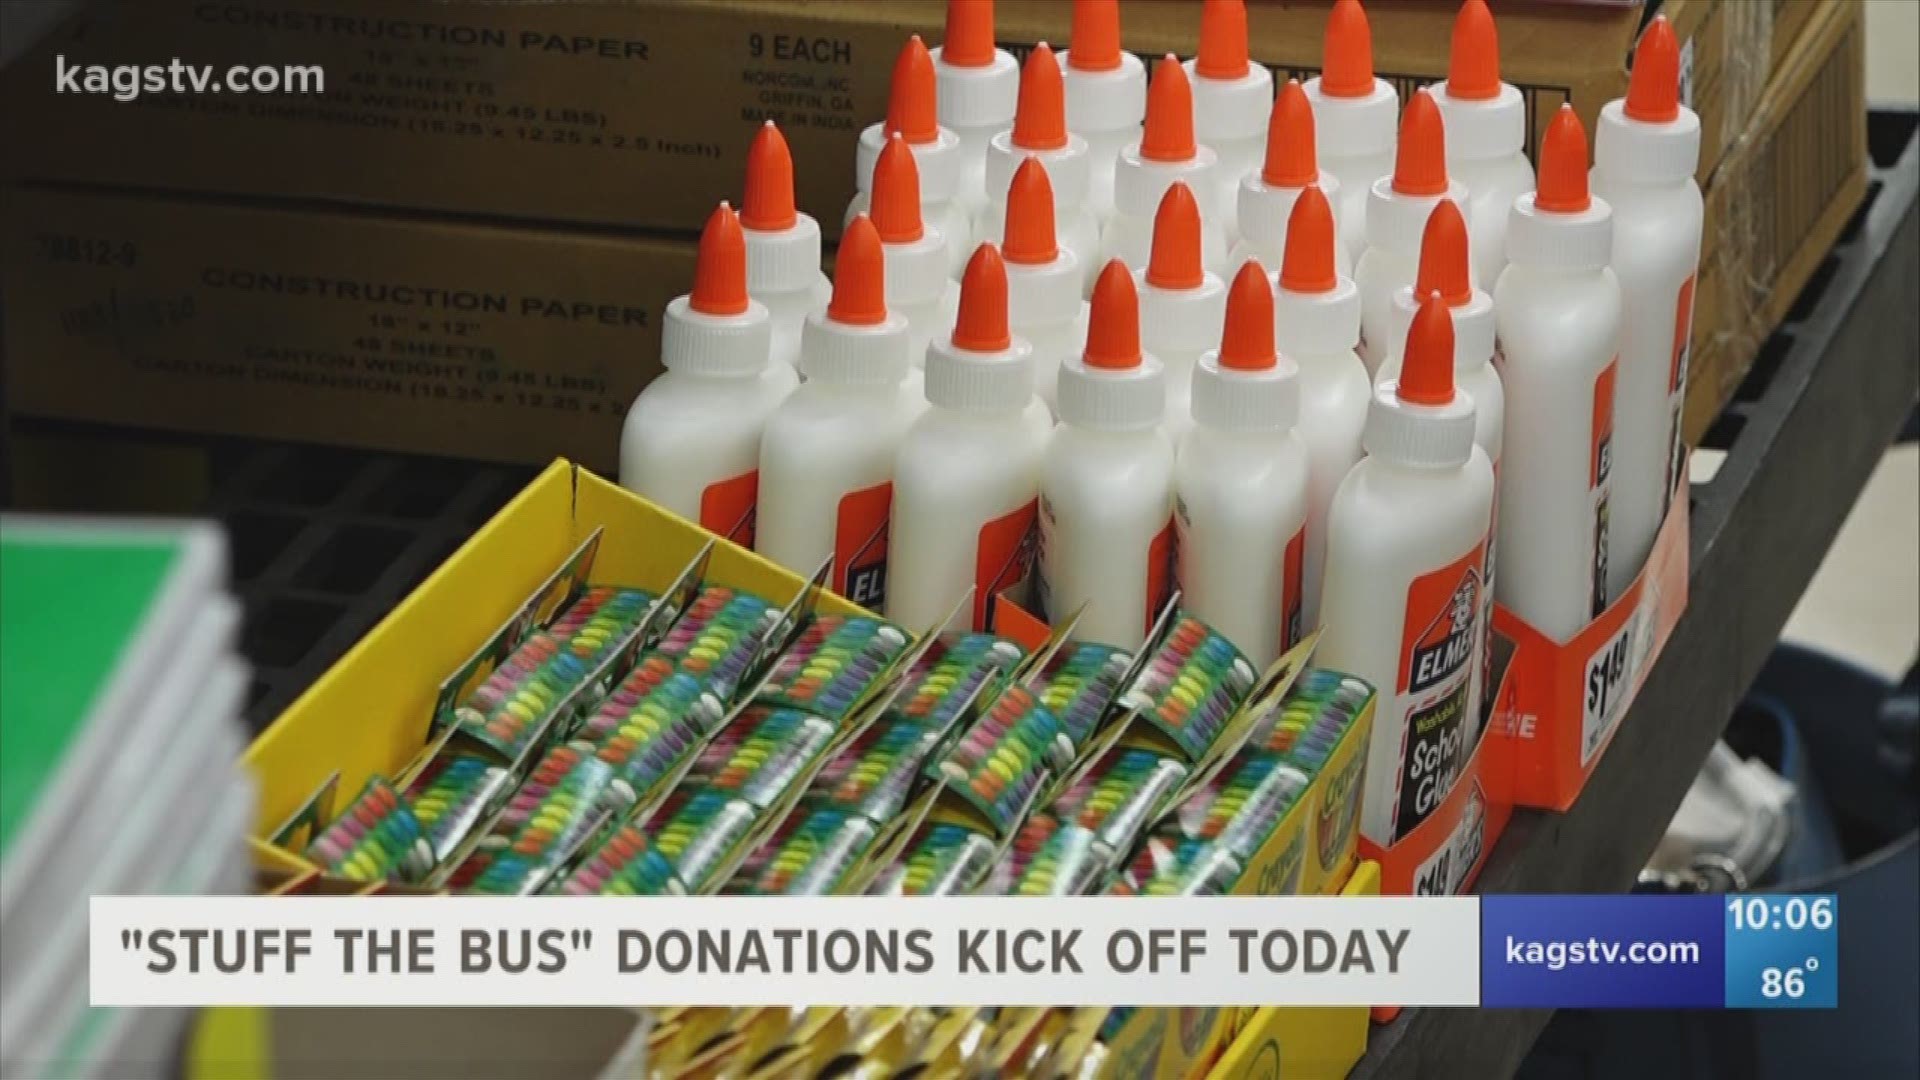 The annual "Stuff the Bus" donation event kicked off Monday. School supplies can be donated throughout the week.